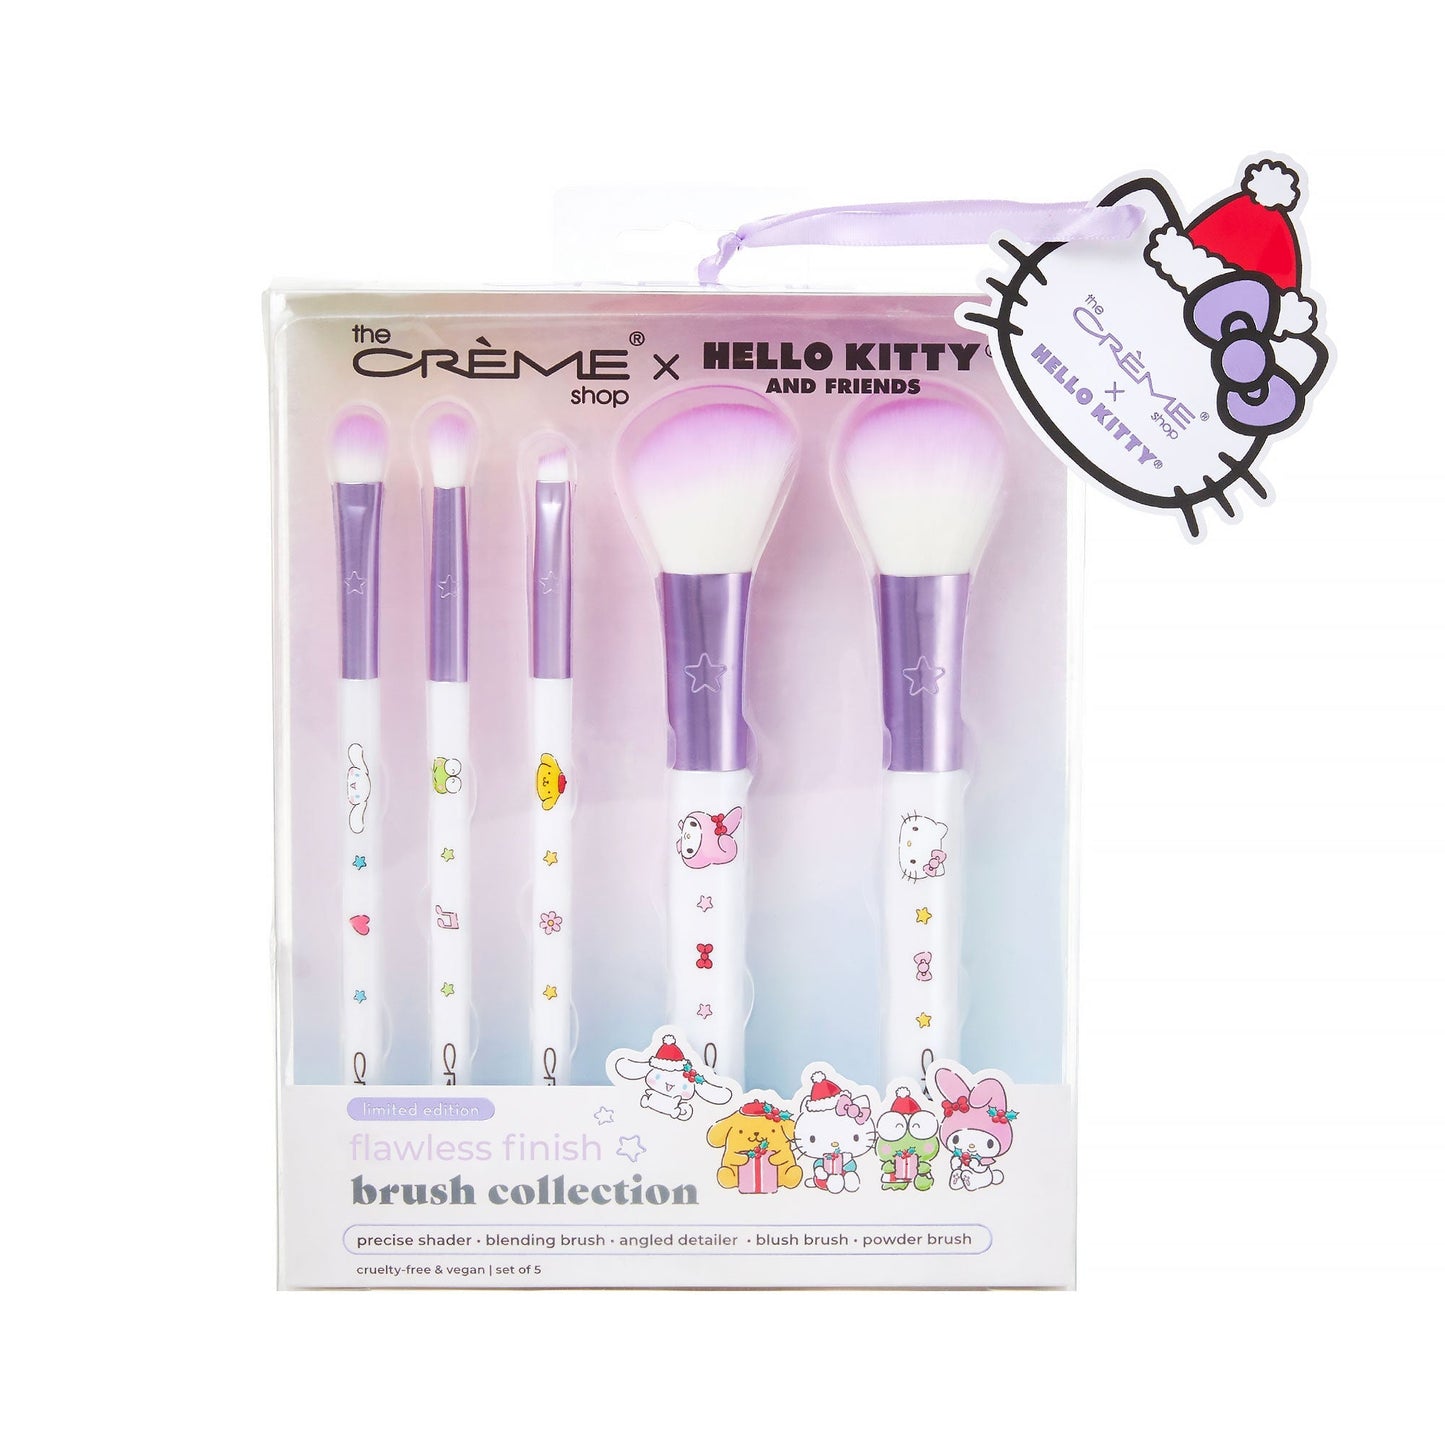 The Crème Shop x Hello Kitty – Holiday Flawless Finish Brush Collection (Set of 5) Brush Sets The Crème Shop x Sanrio 